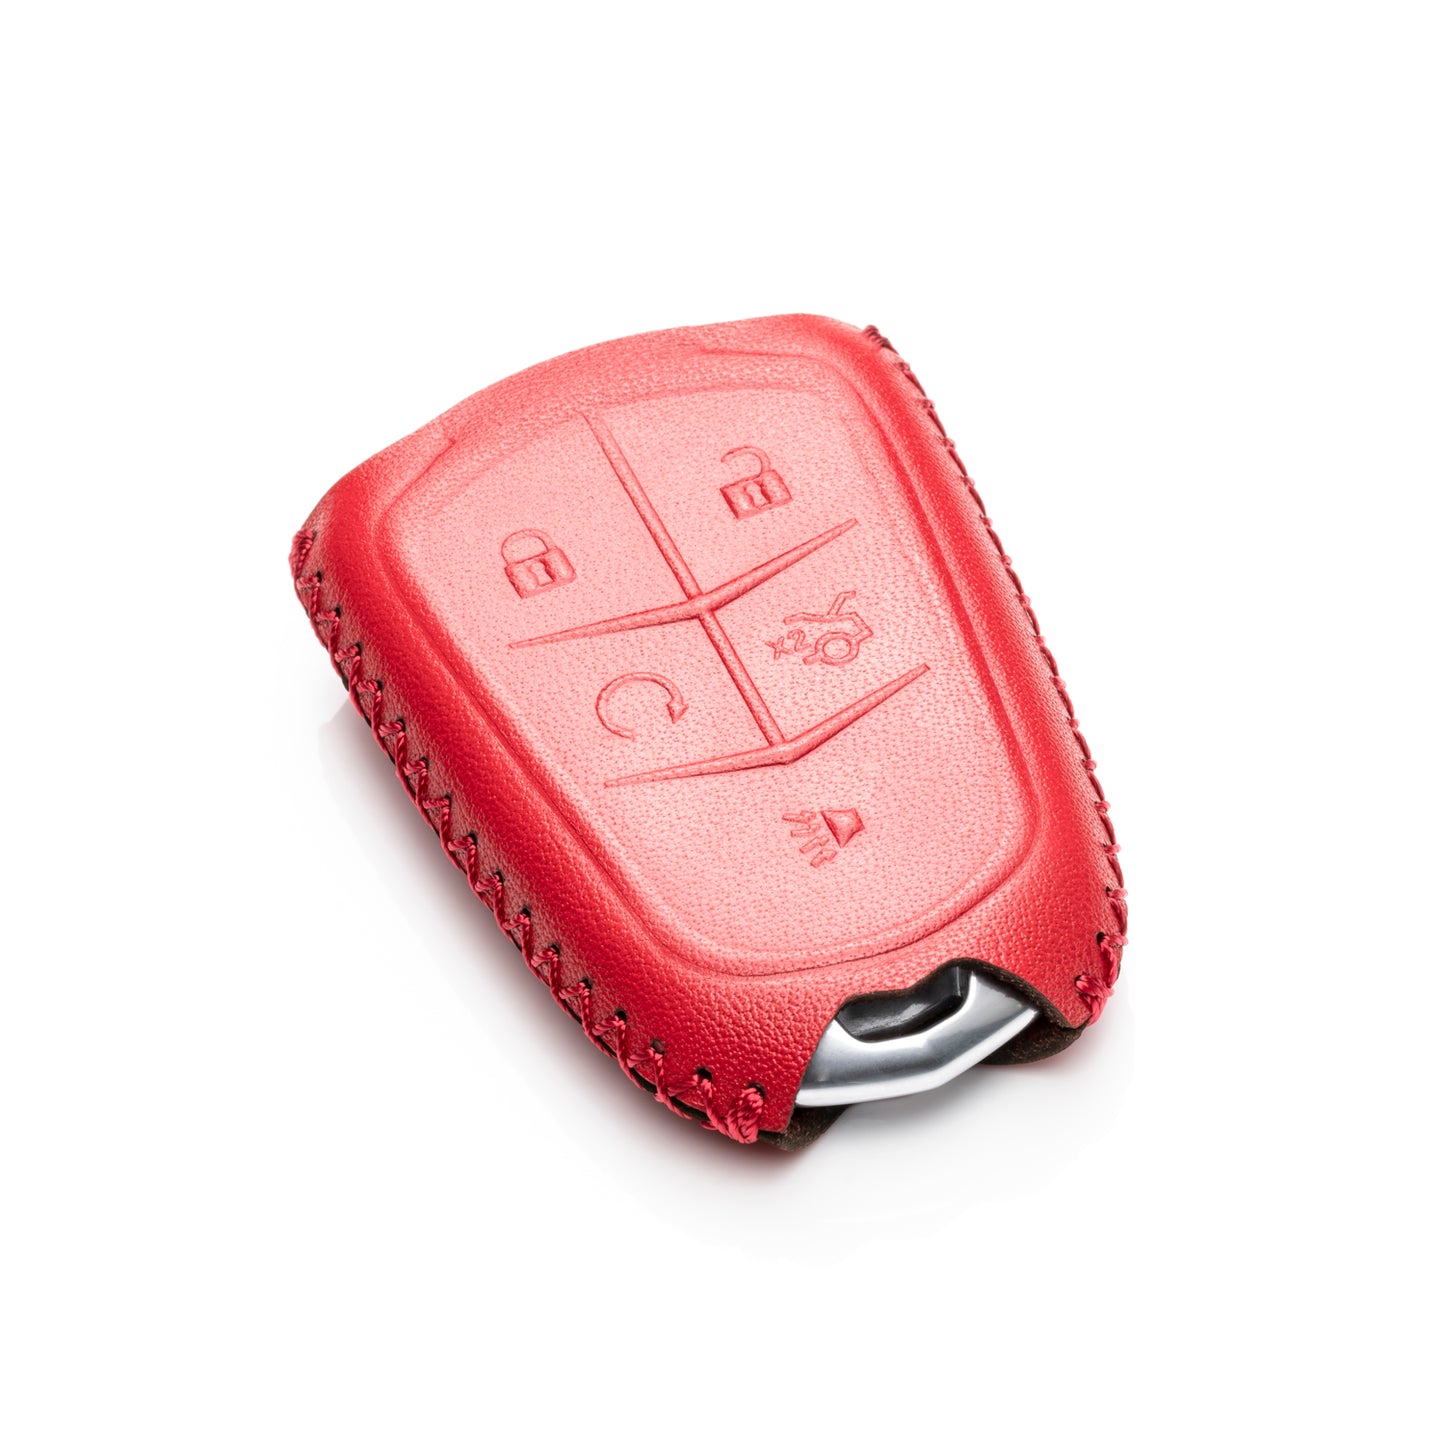 Vitodeco 5-Button Genuine Leather Smart Key Fob Case Cover Compatible for Cadillac ATS, CT6, CTS, SRX, XT5, XTS